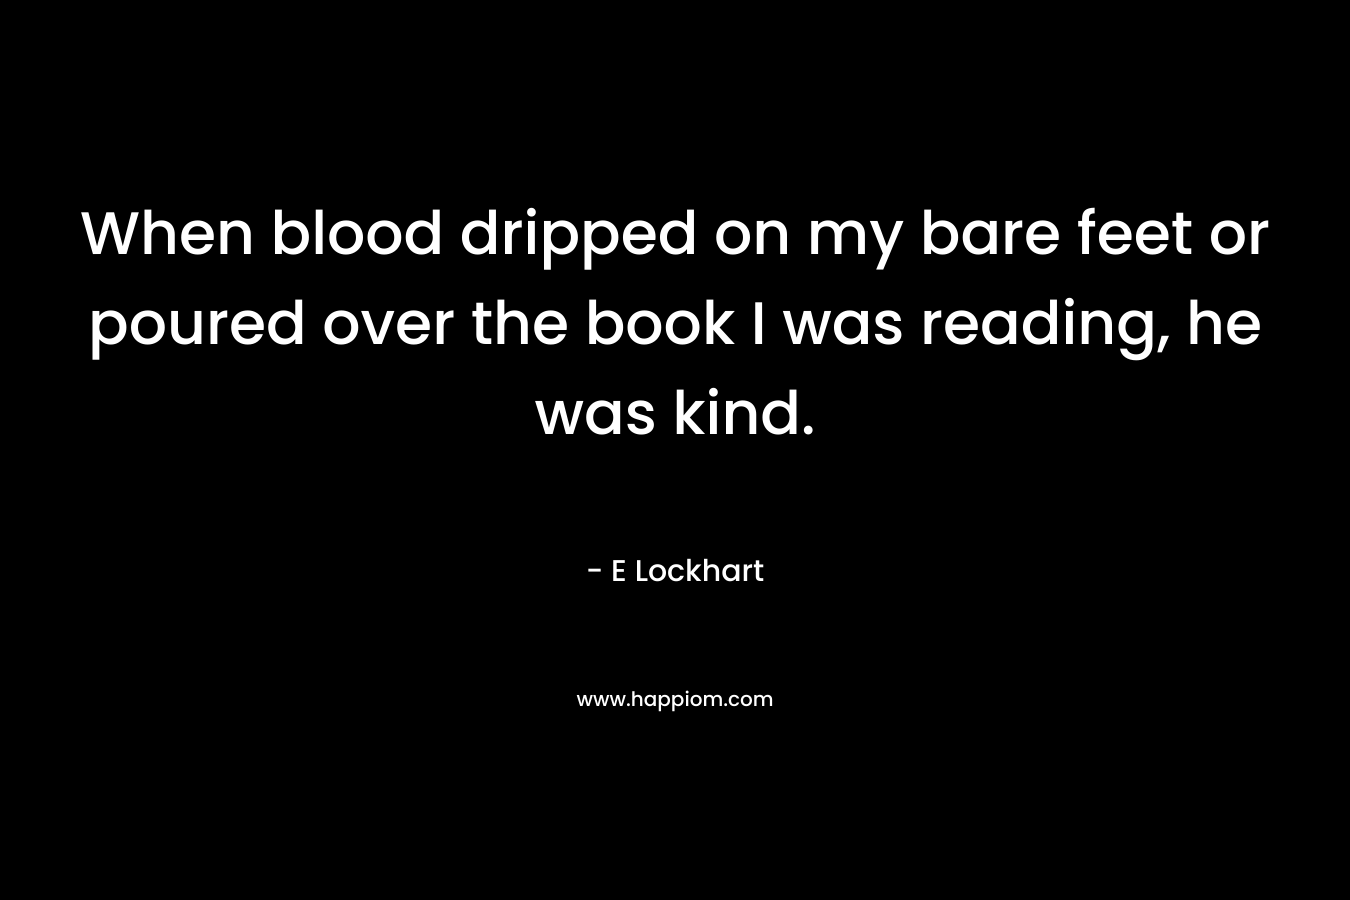 When blood dripped on my bare feet or poured over the book I was reading, he was kind. – E Lockhart